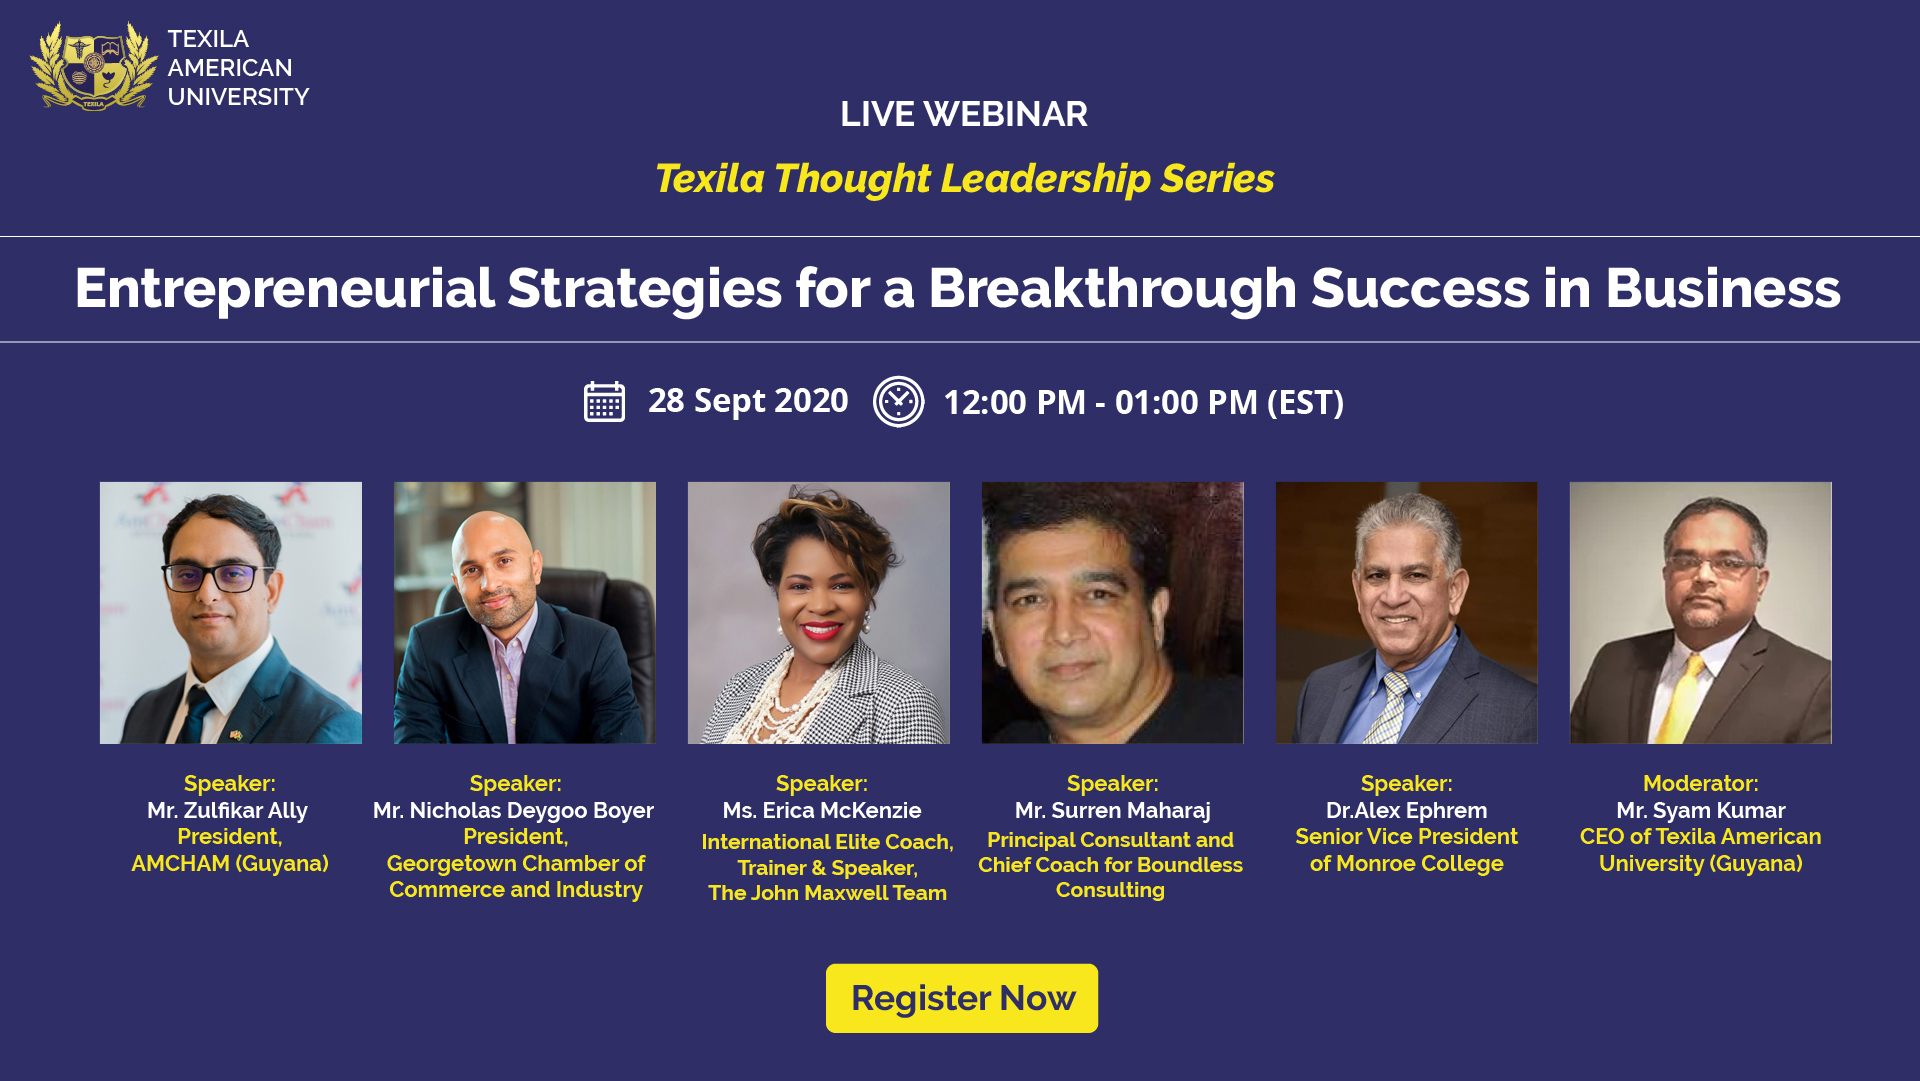 Entrepreneurial Strategies for a Breakthrough Success in Business